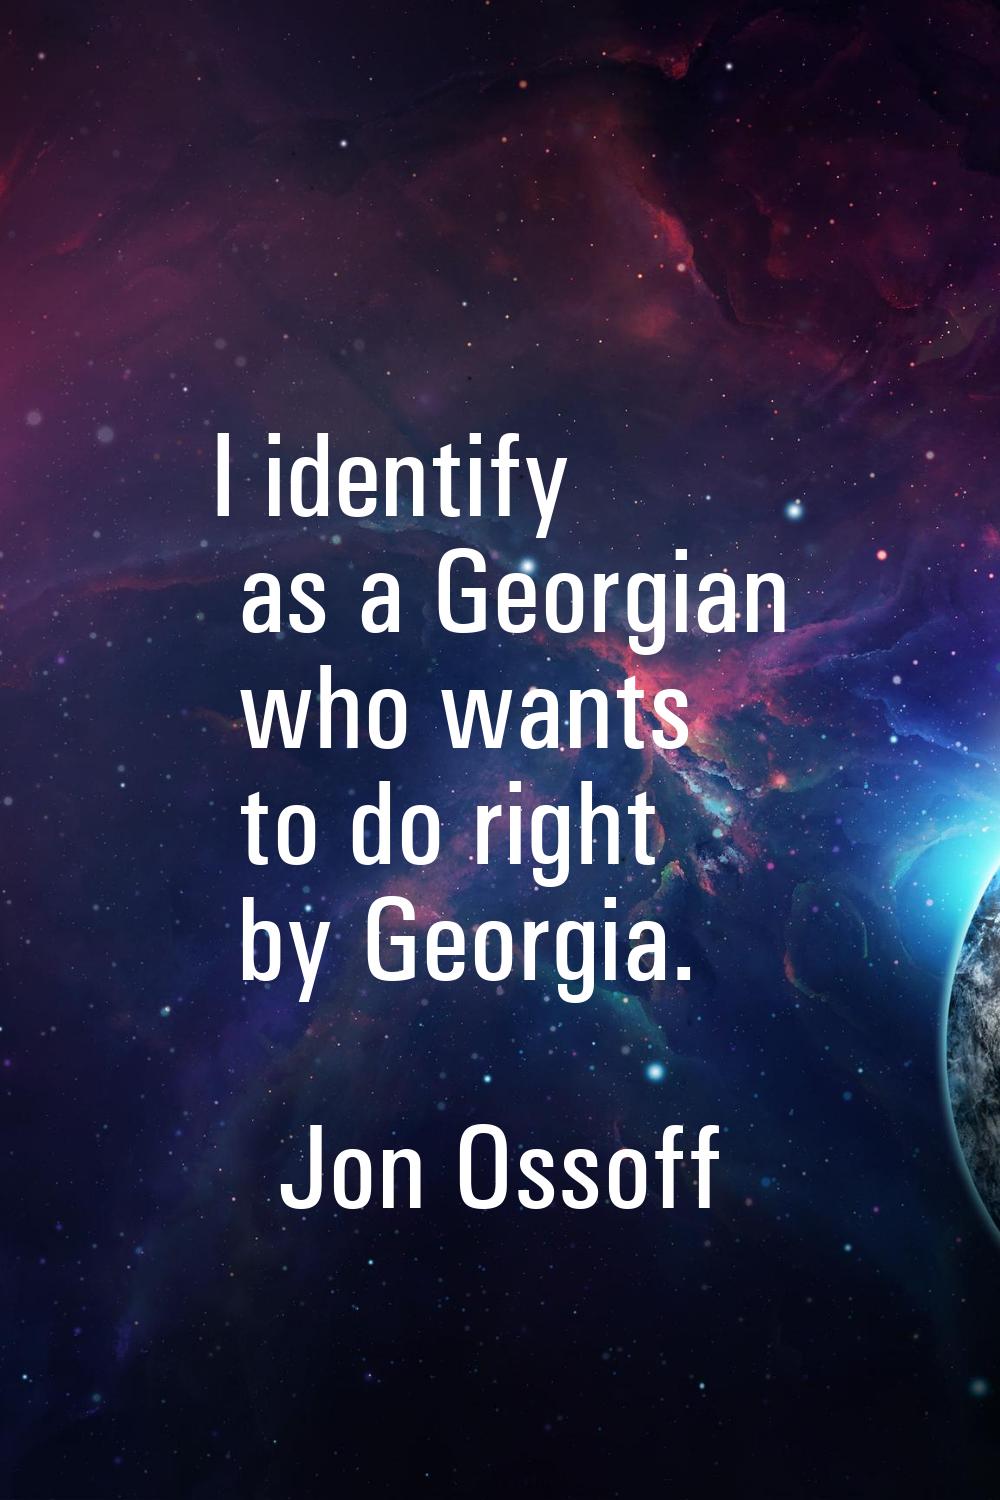 I identify as a Georgian who wants to do right by Georgia.